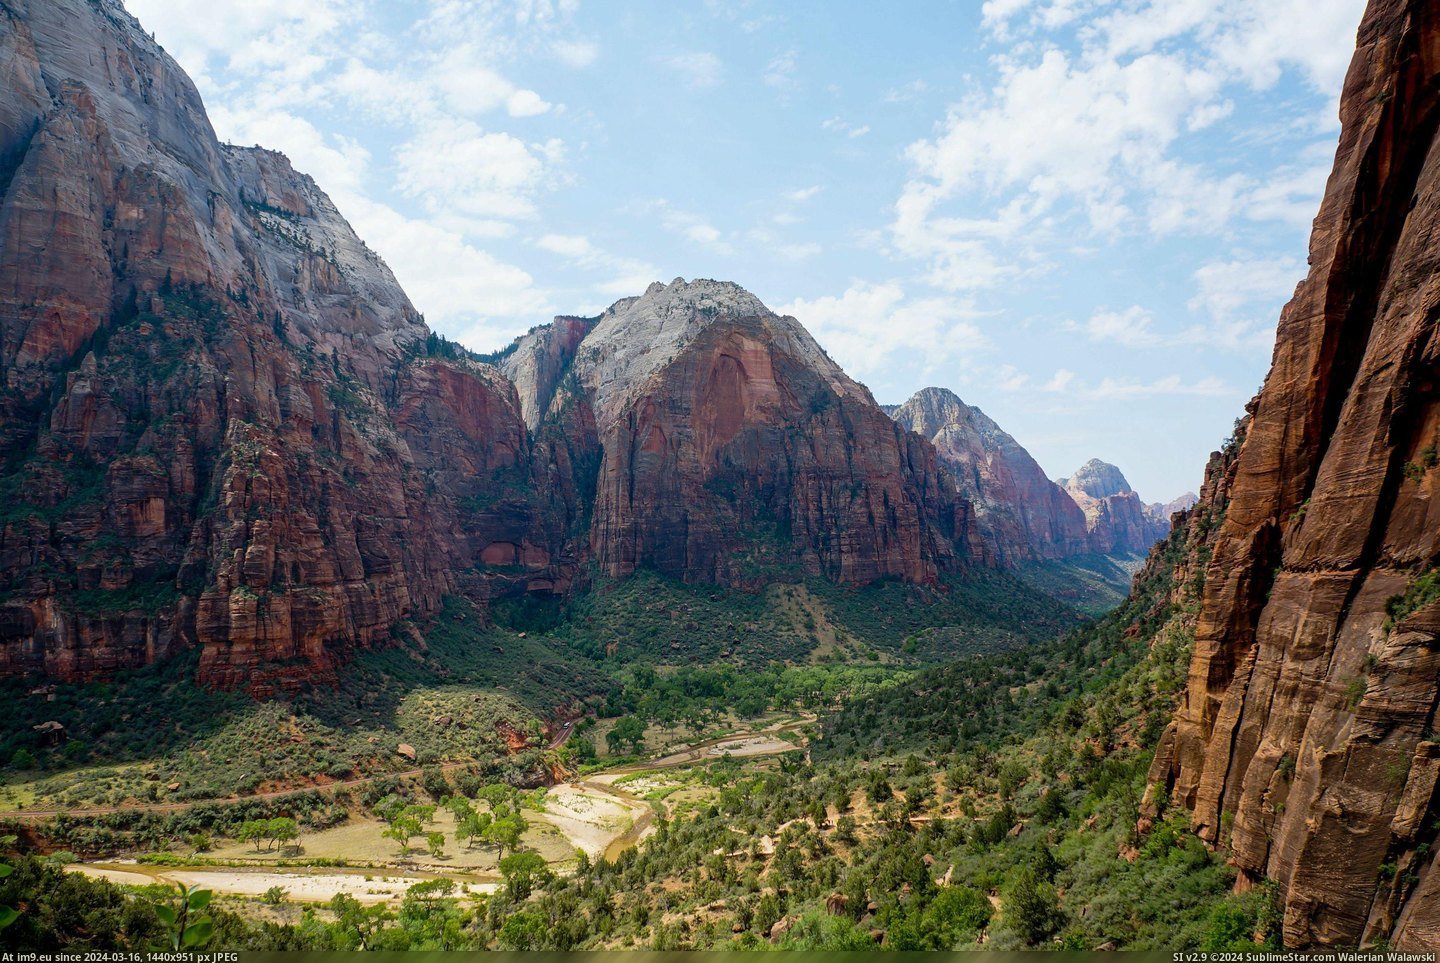 #Park #National #Landing #Zion #4912x3264 #Angel #Hike [Earthporn] Hike to Angel's Landing - Zion National Park, UT [4912x3264] Pic. (Image of album My r/EARTHPORN favs))